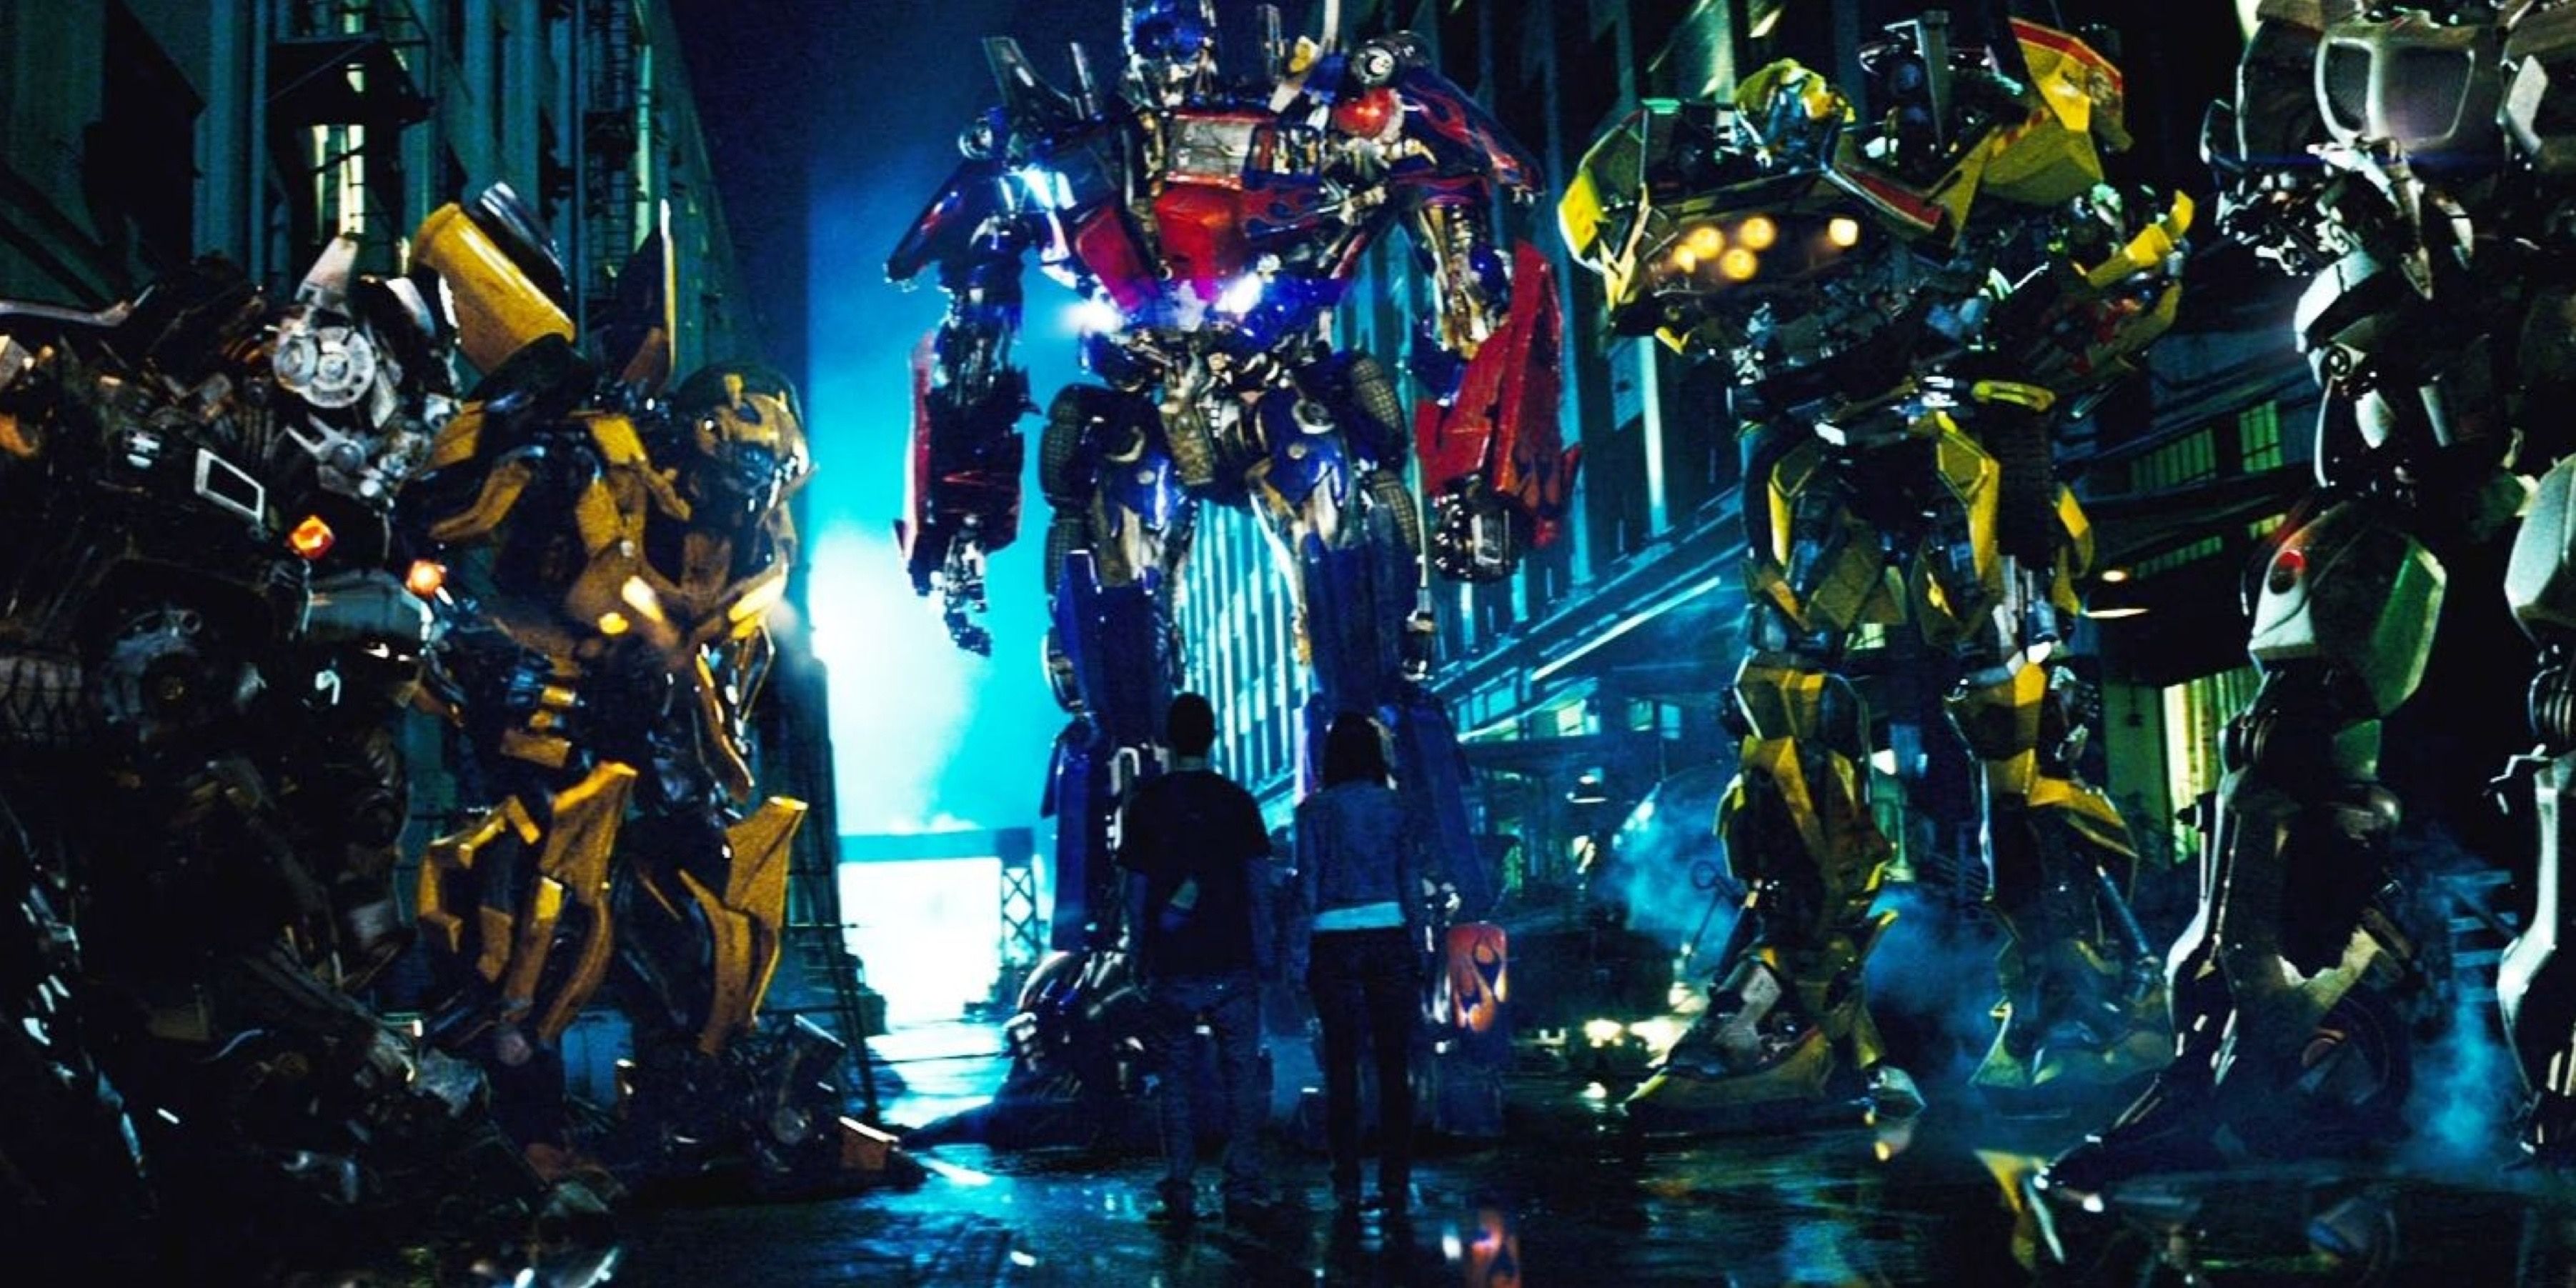 Transformers, Autobots from 2007 movie